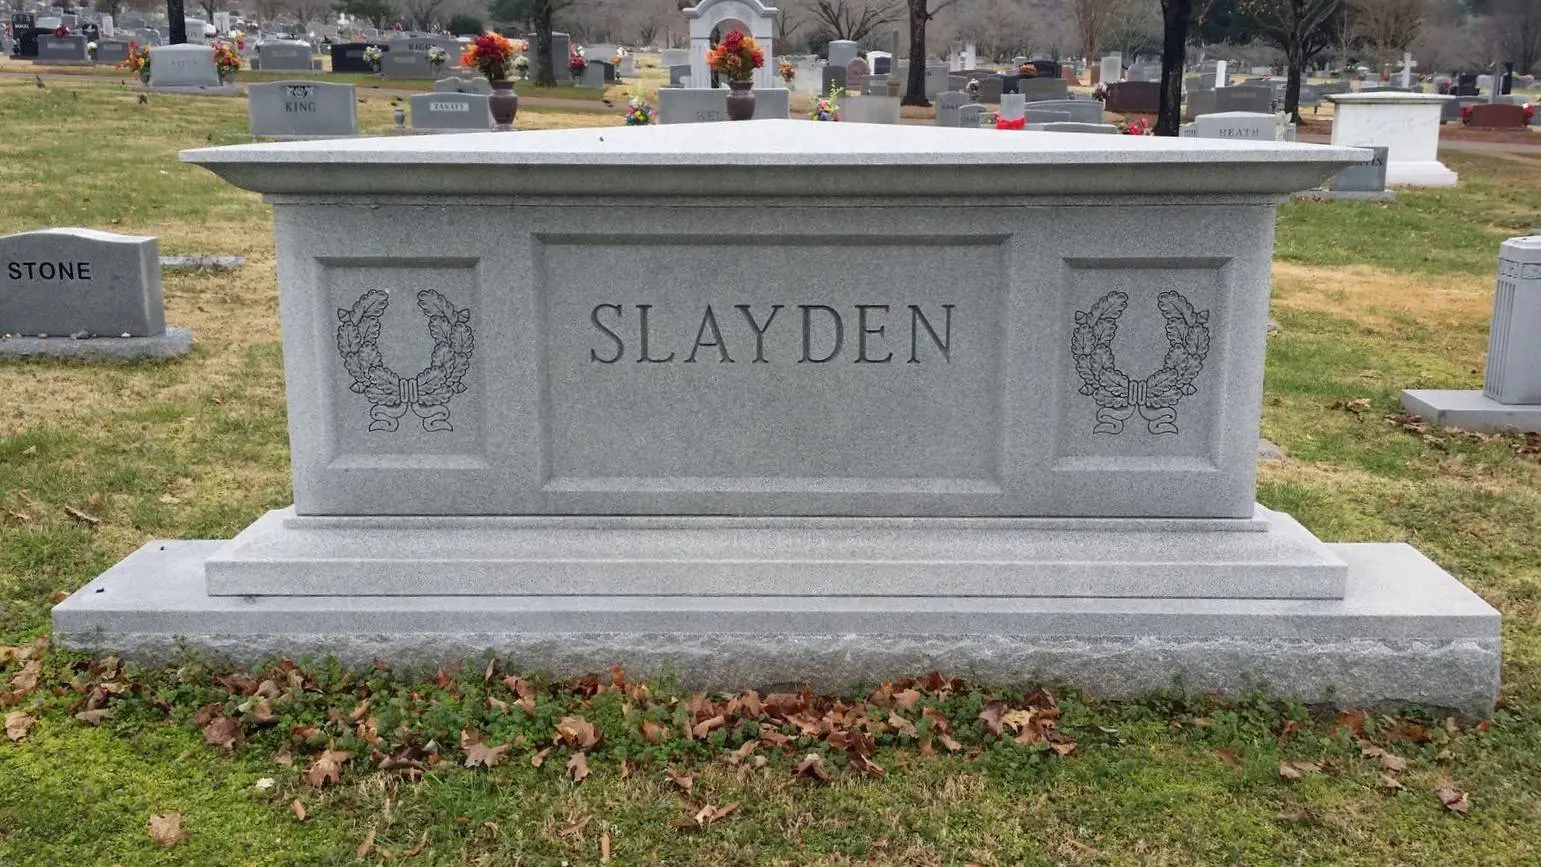 A memorial slab with the name and illustration of Slayden